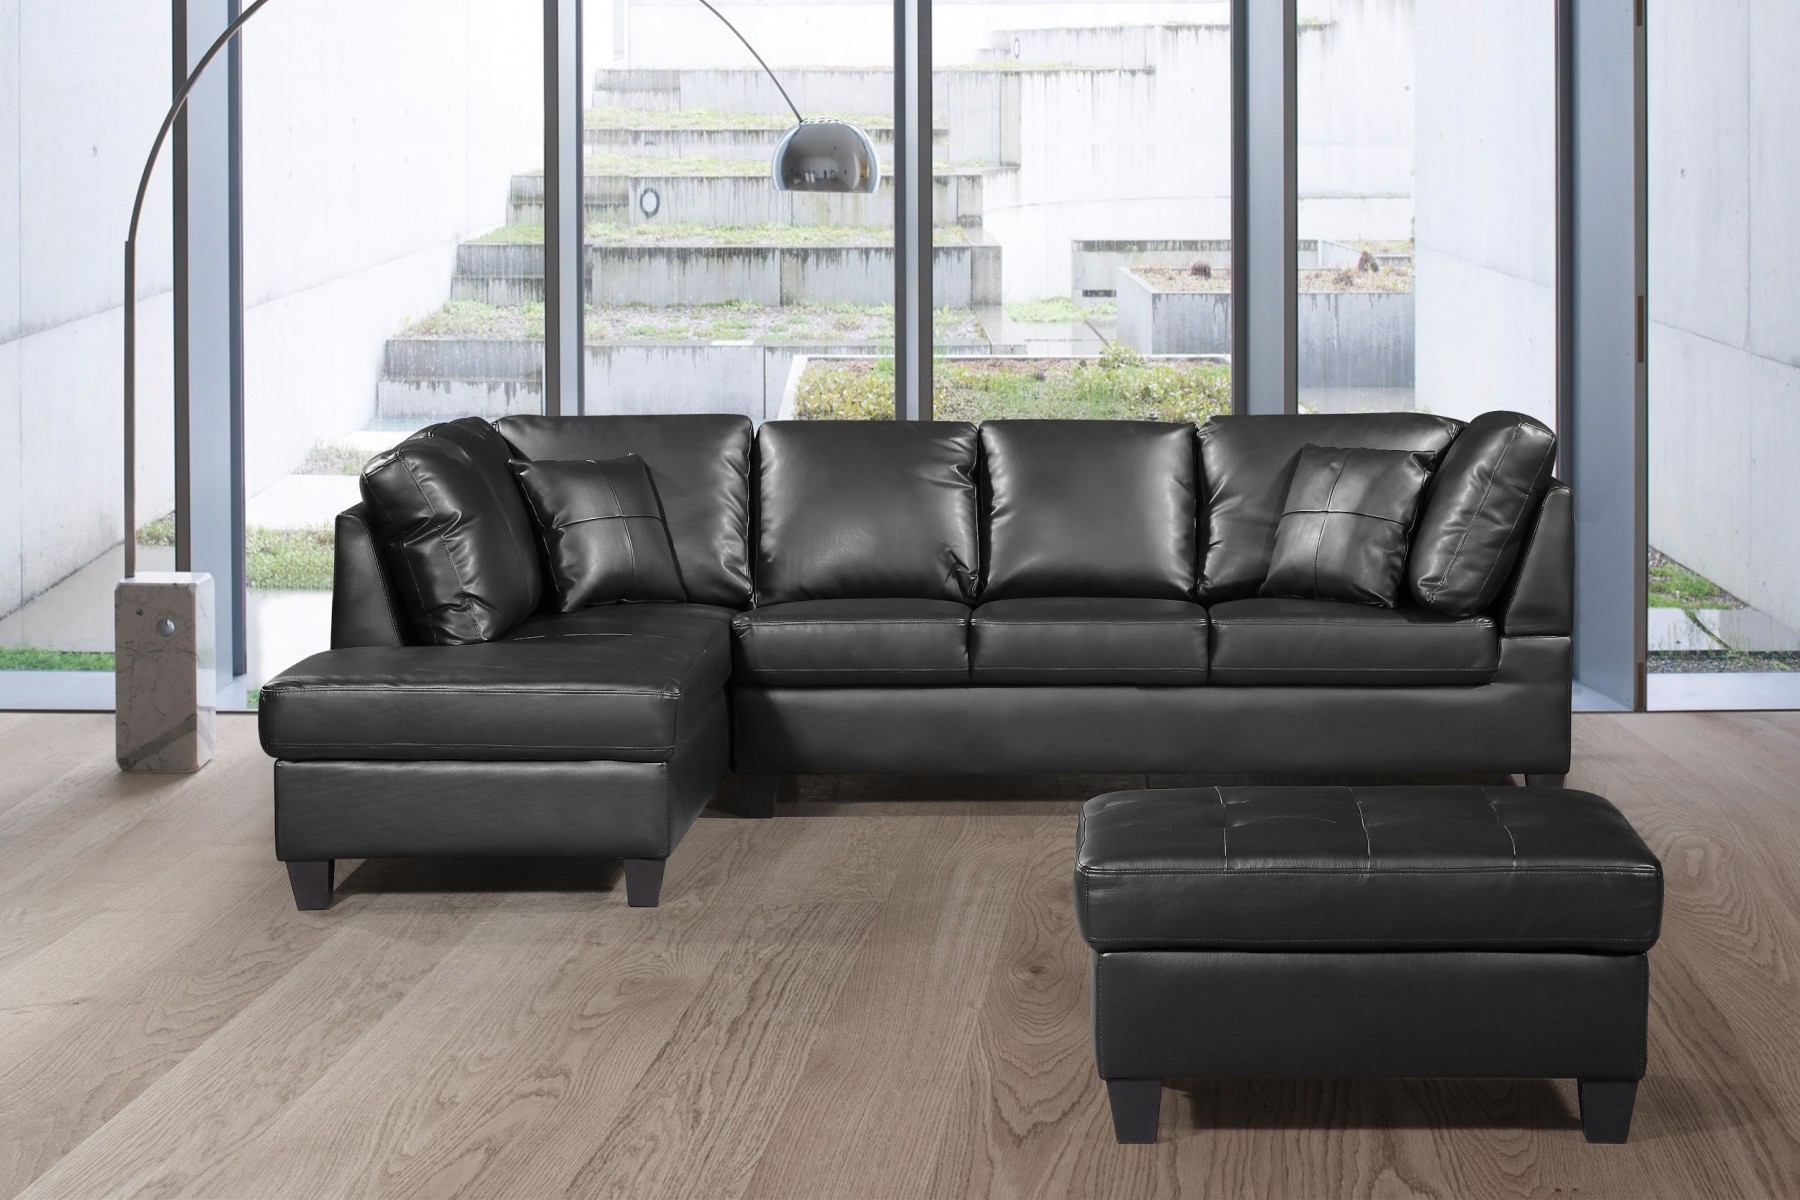 black leather 3 piece sectional sofa